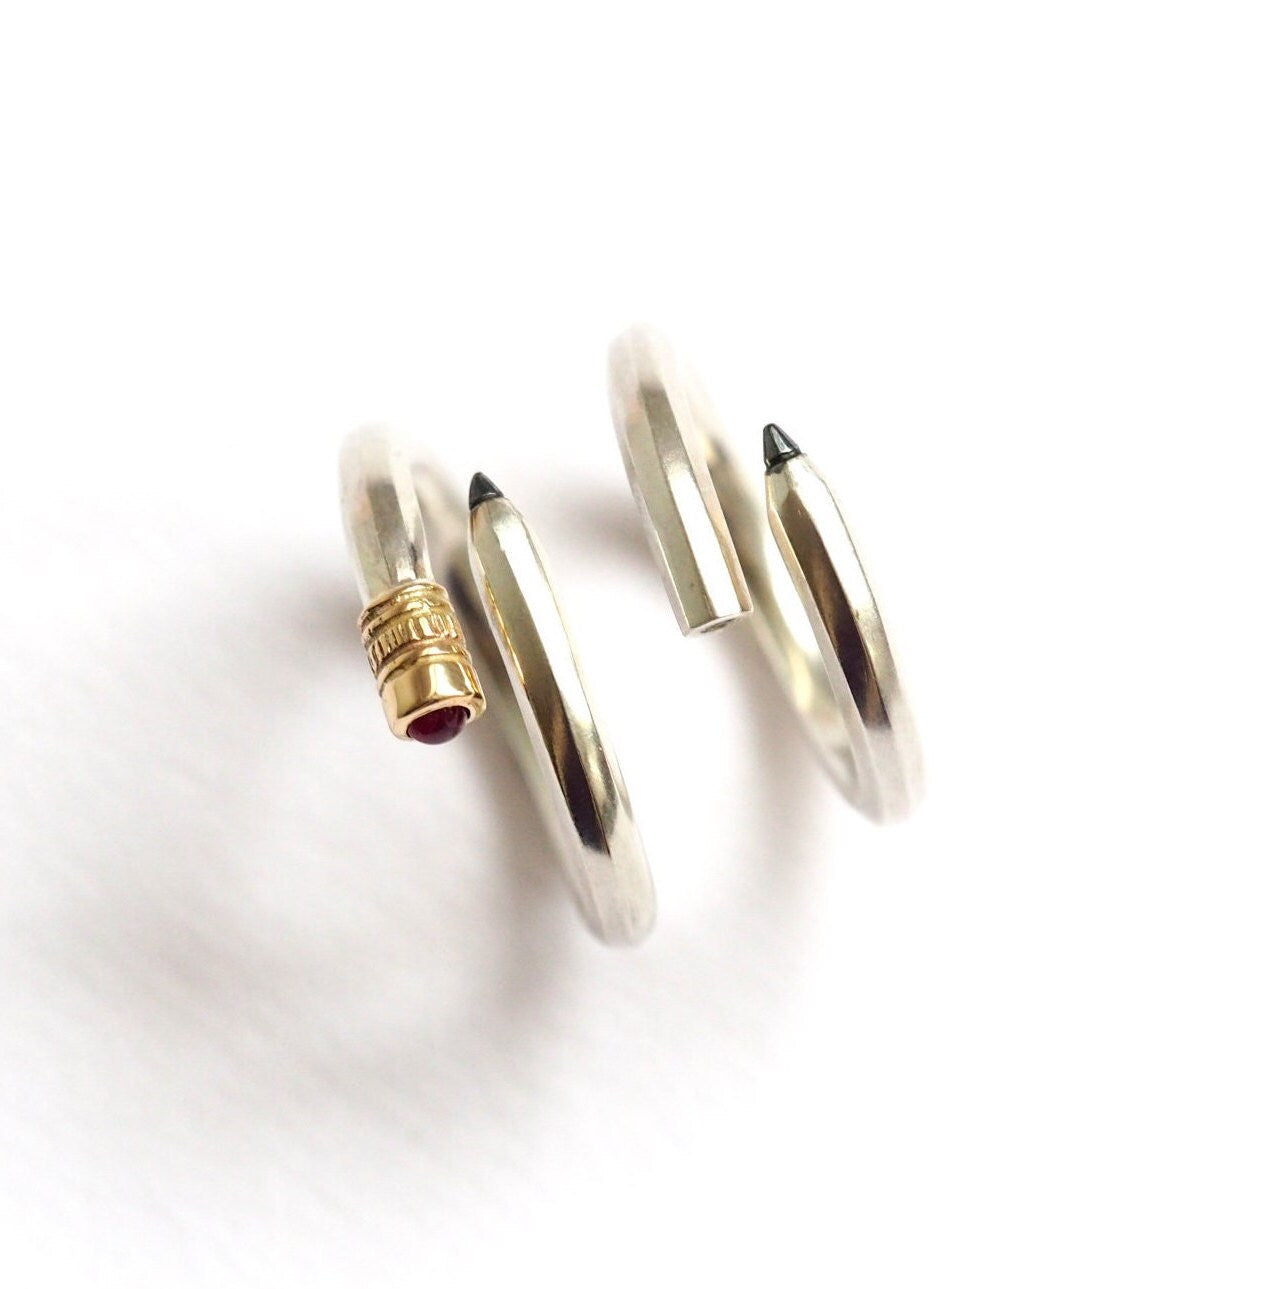 Pencil Ring - Silver, Gold and Ruby